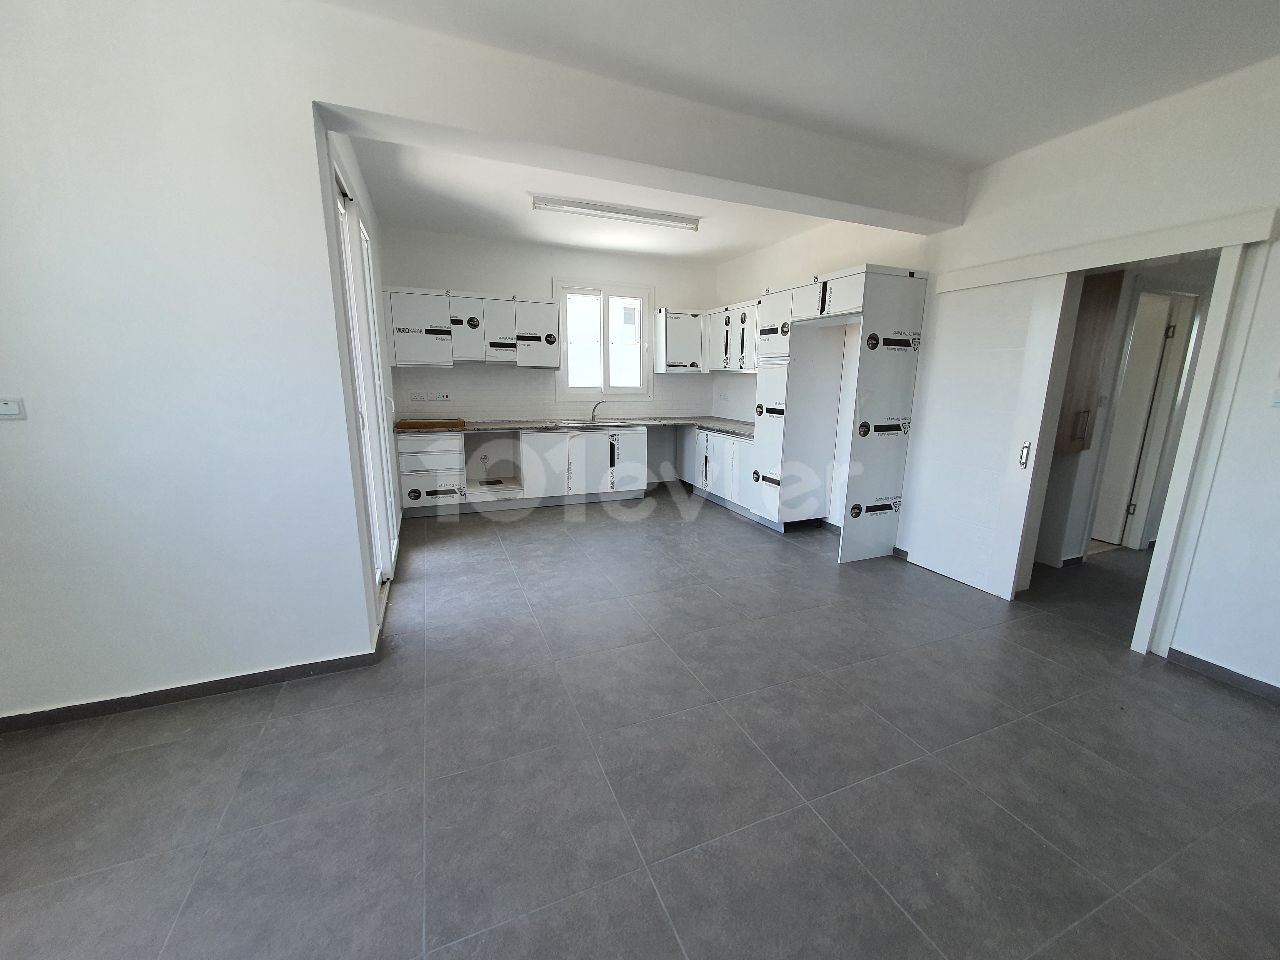 IN A QUIET AND PEACEFUL NEIGHBORHOOD OF 127M2 CONSISTING OF 4 APARTMENTS ON 2 FLOORS IN TOTAL IN MITRELI YEŞILADA DISTRICT 3 + 1 LUXURY APARTMENTS WITH ALL TAXES PAID WITH THEIR OWN LARGE TERRACE SECTION ** 